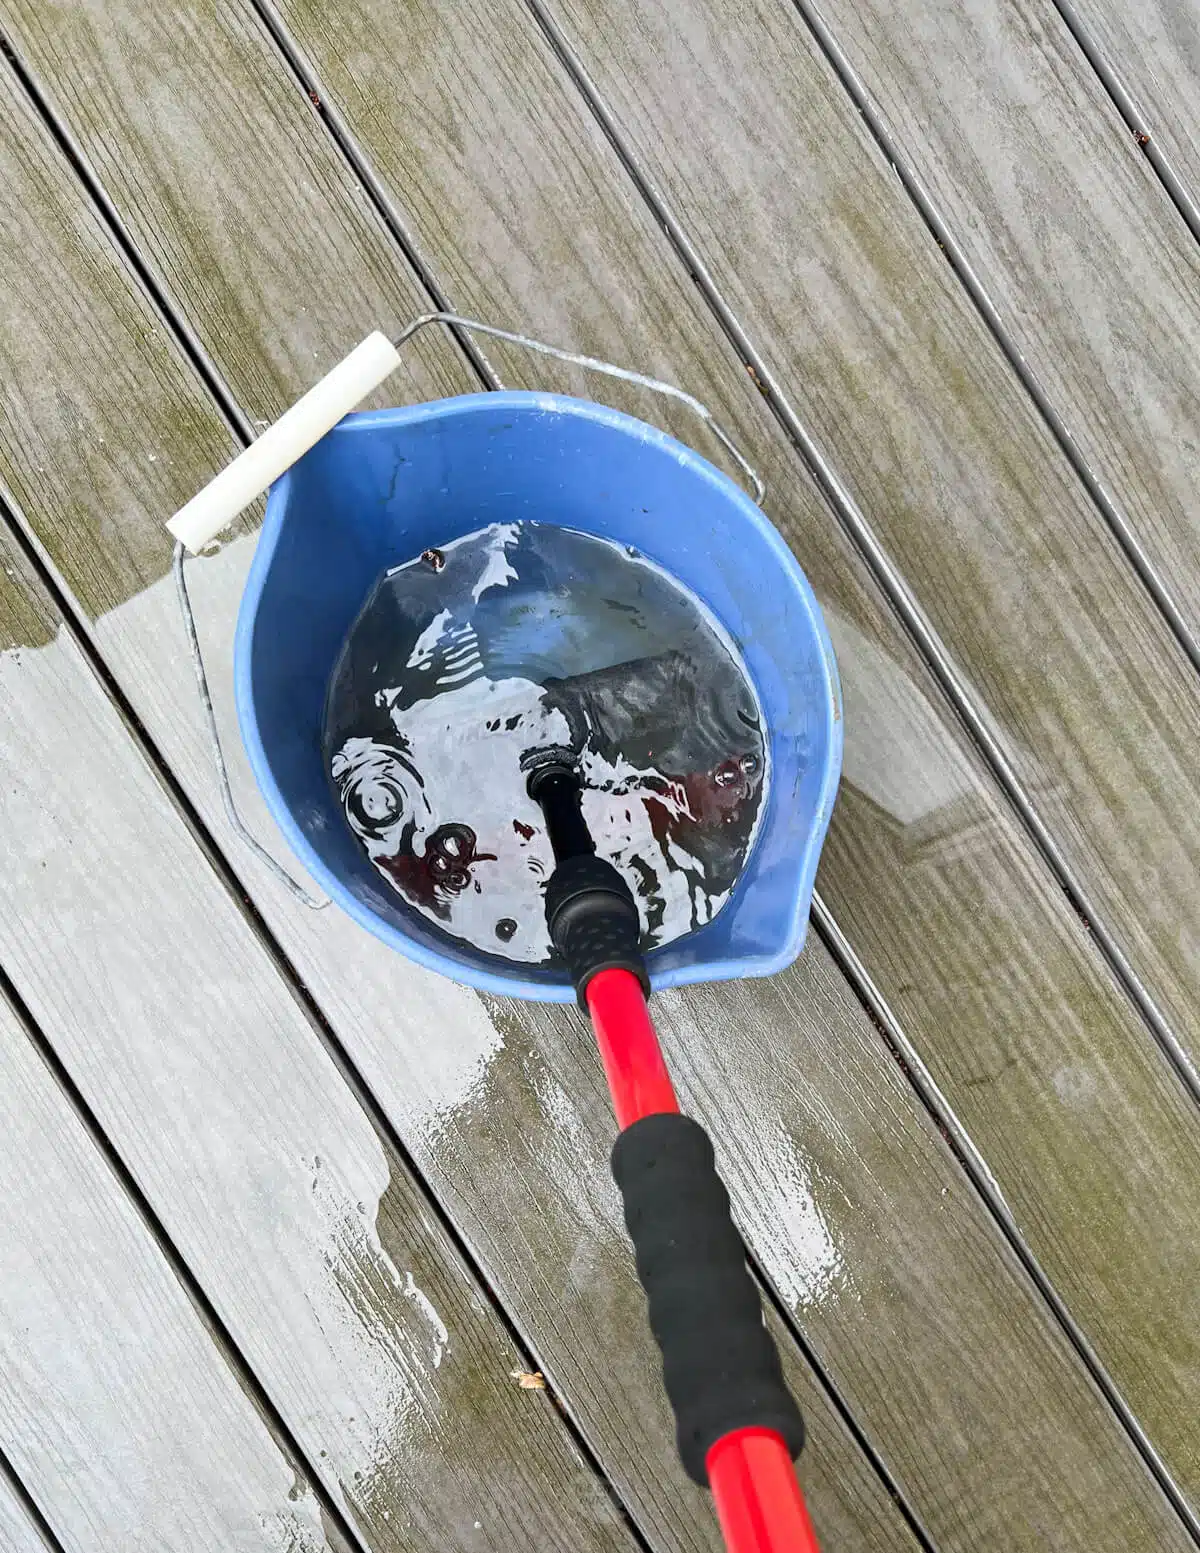 deck brush being put in DIY cleaning solution in blue bucket.